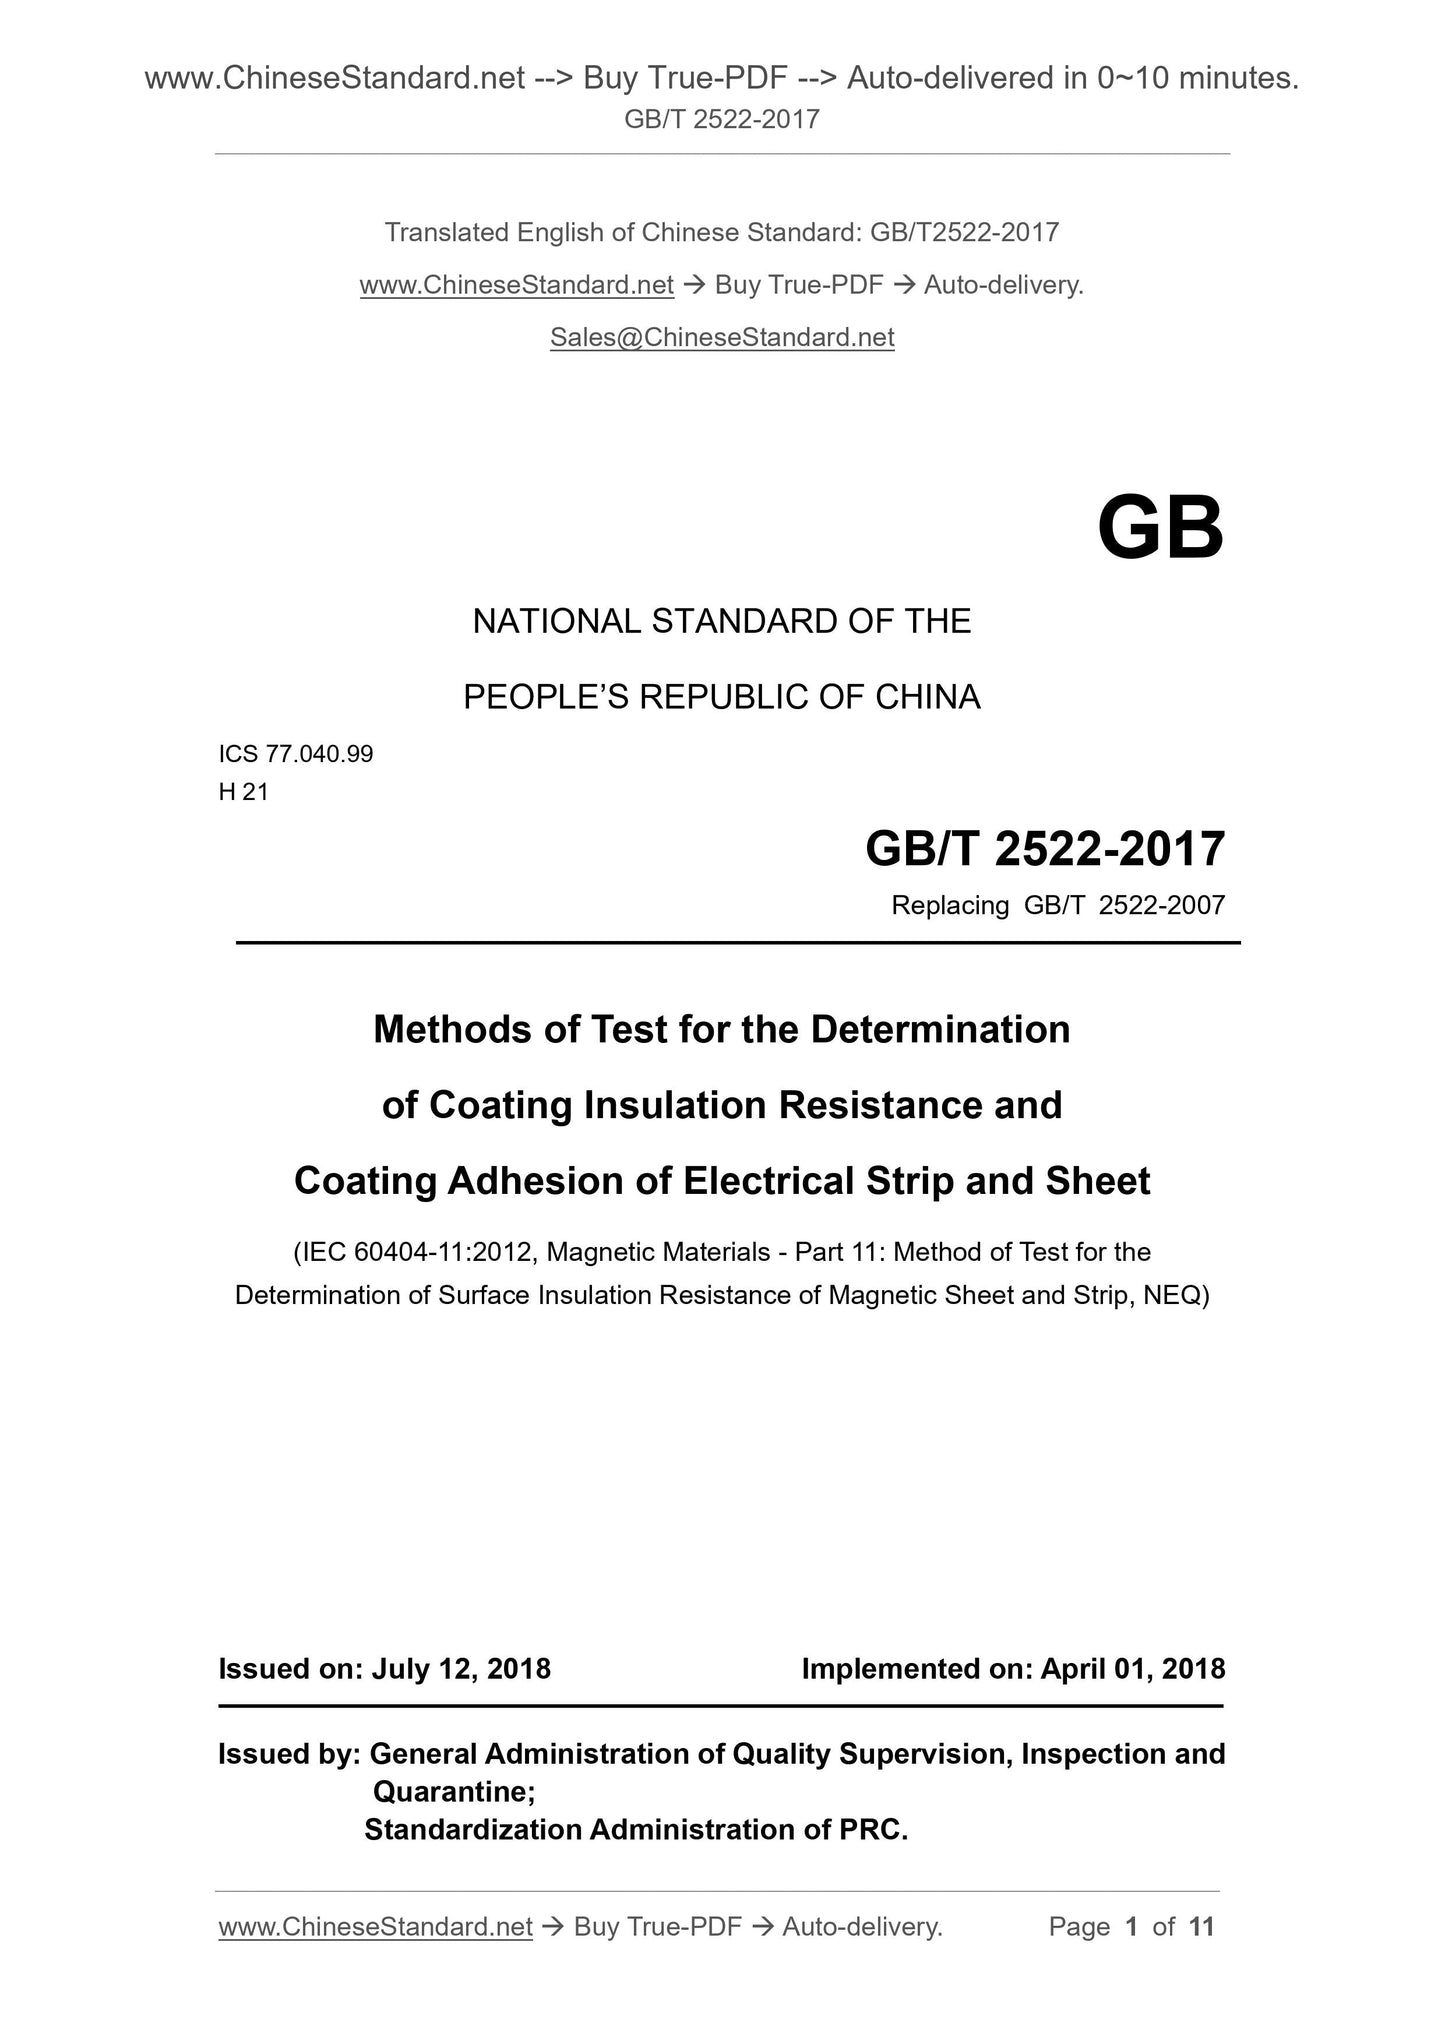 GB/T 2522-2017 Page 1